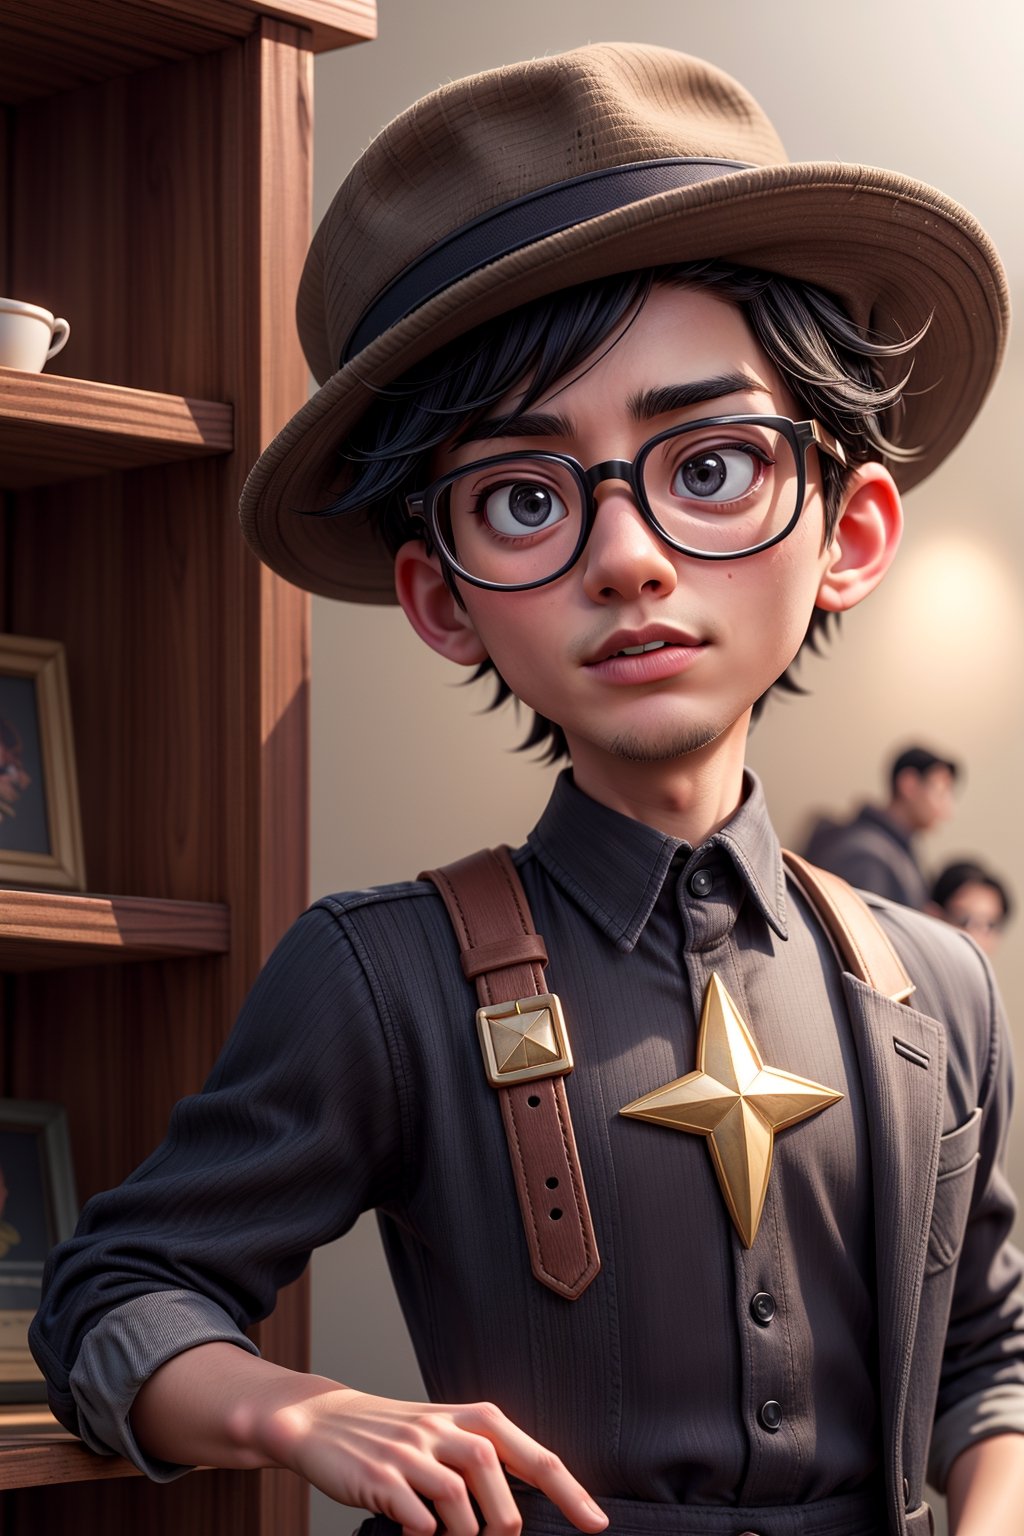 Young man, black hair marvel, disney whit black glasses
and hat